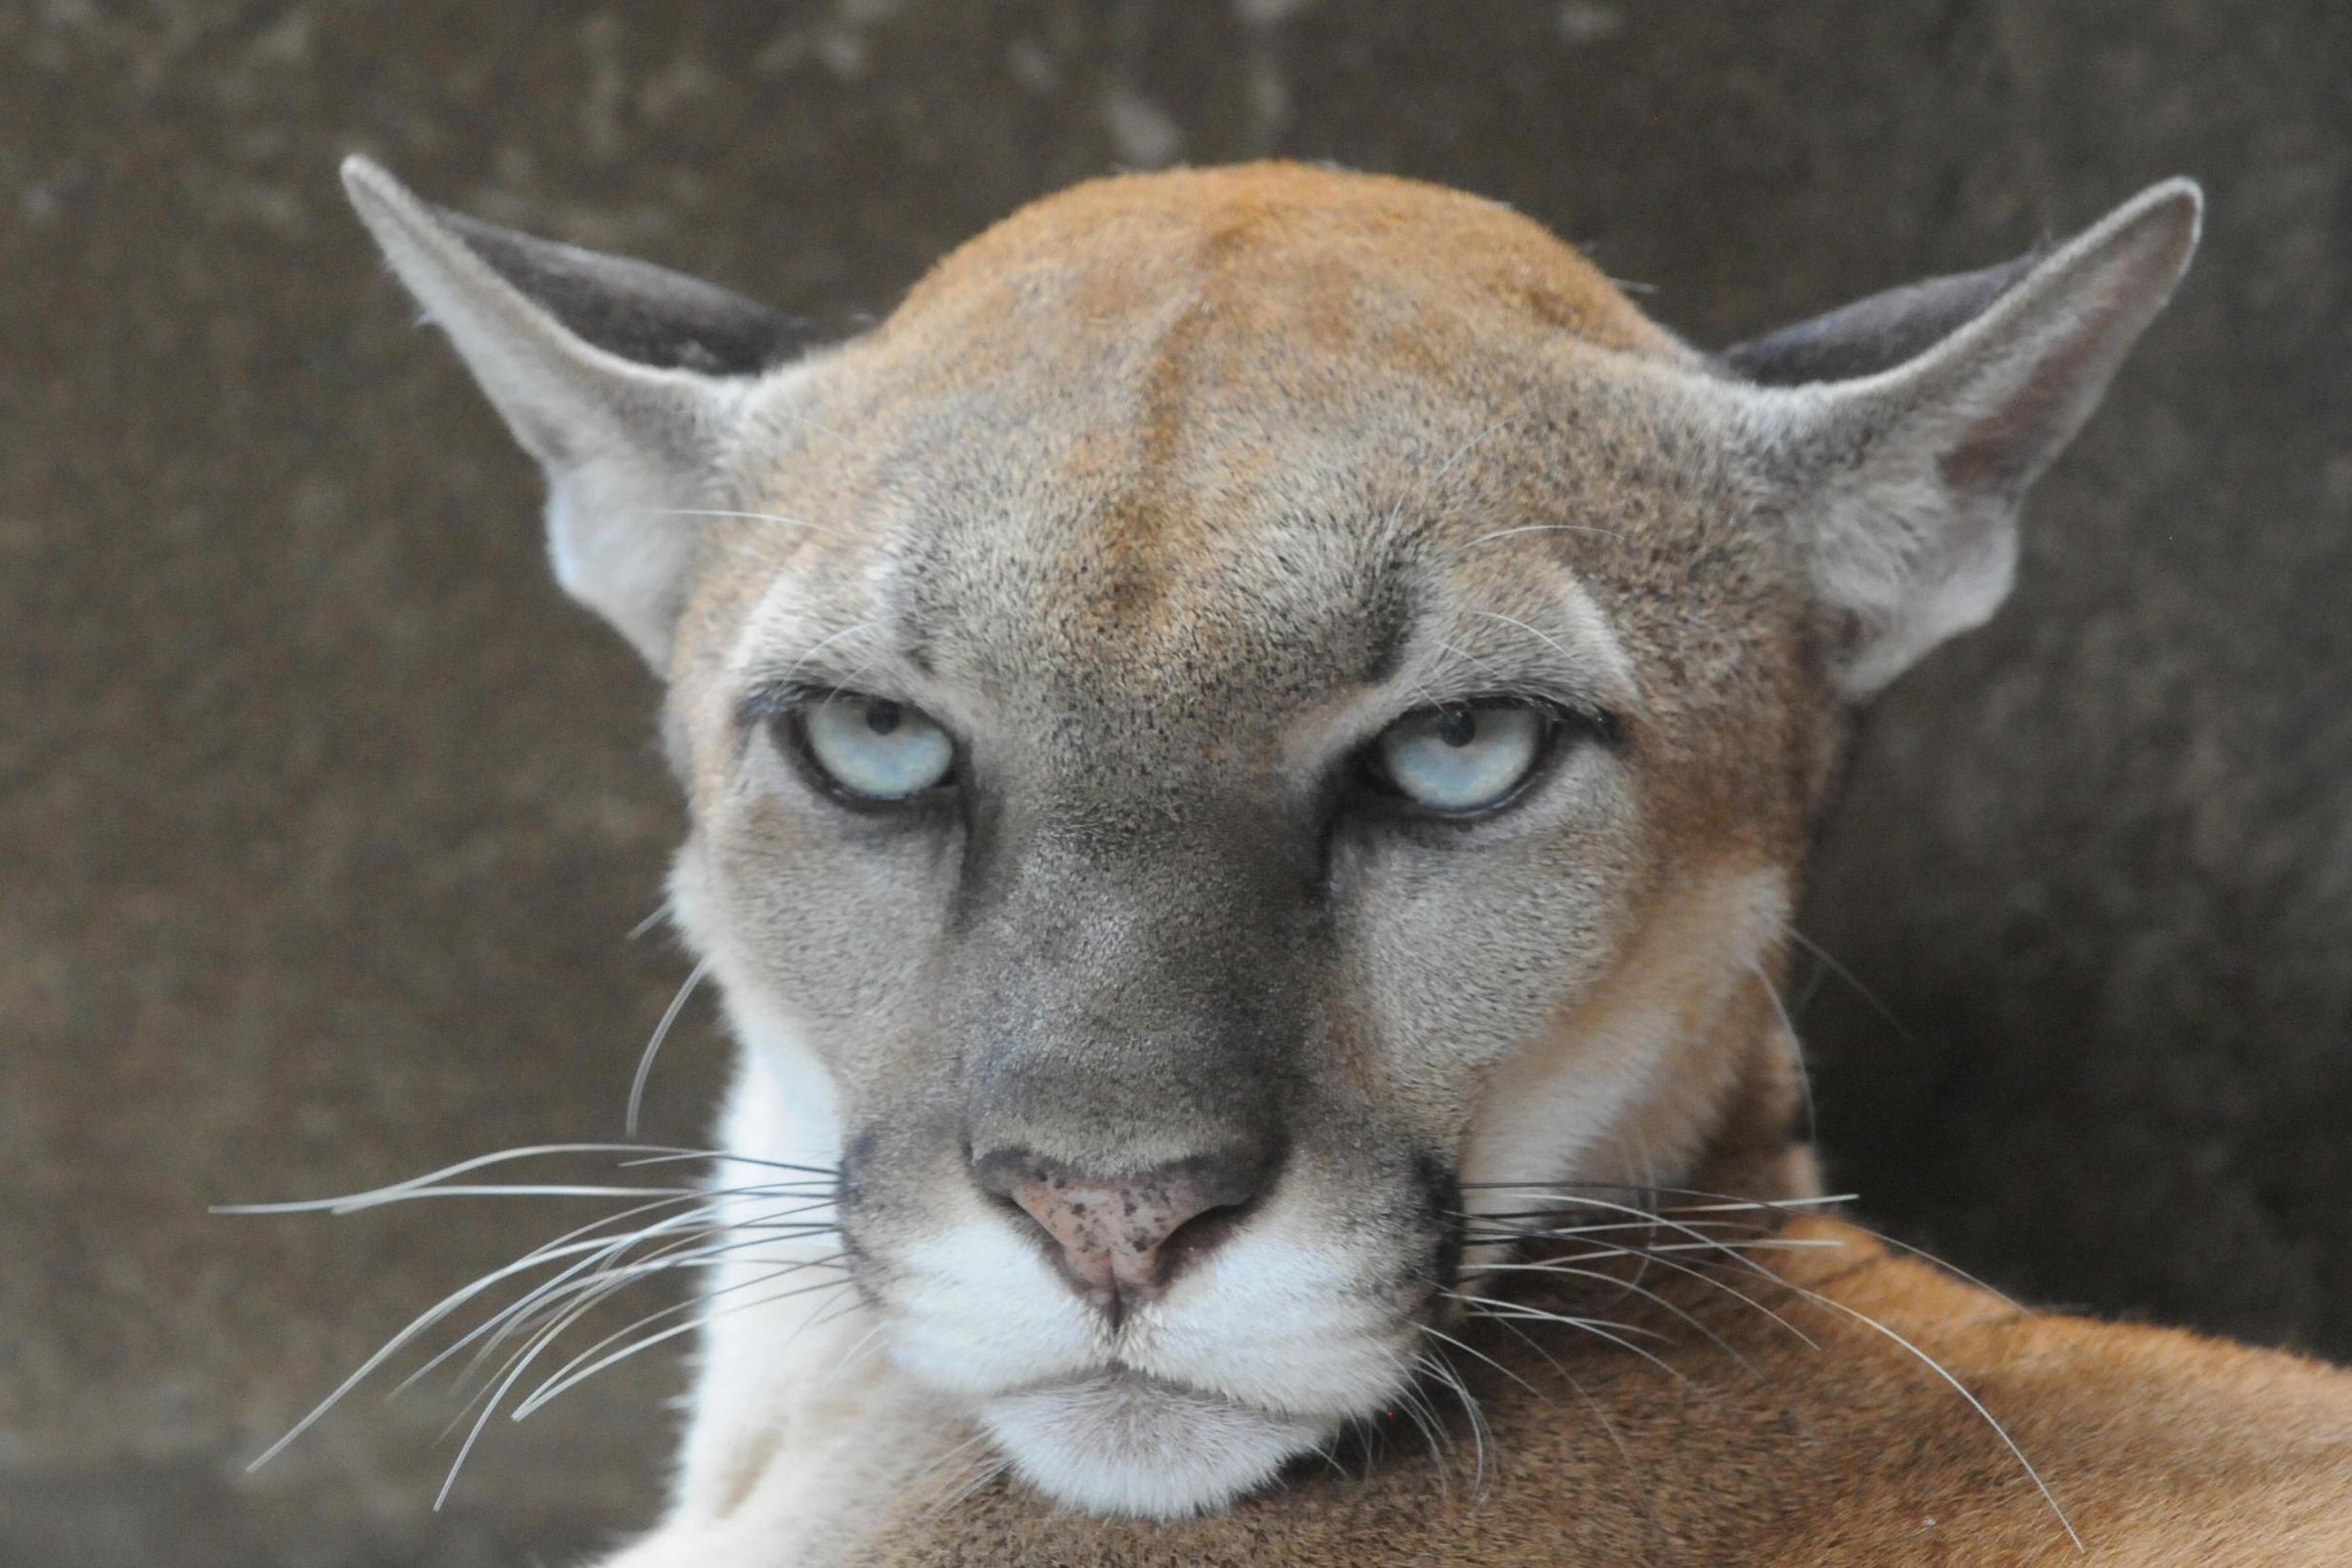 Woman punches mountain lion in face as it attacks her miniature schnauzer |  The Independent | The Independent